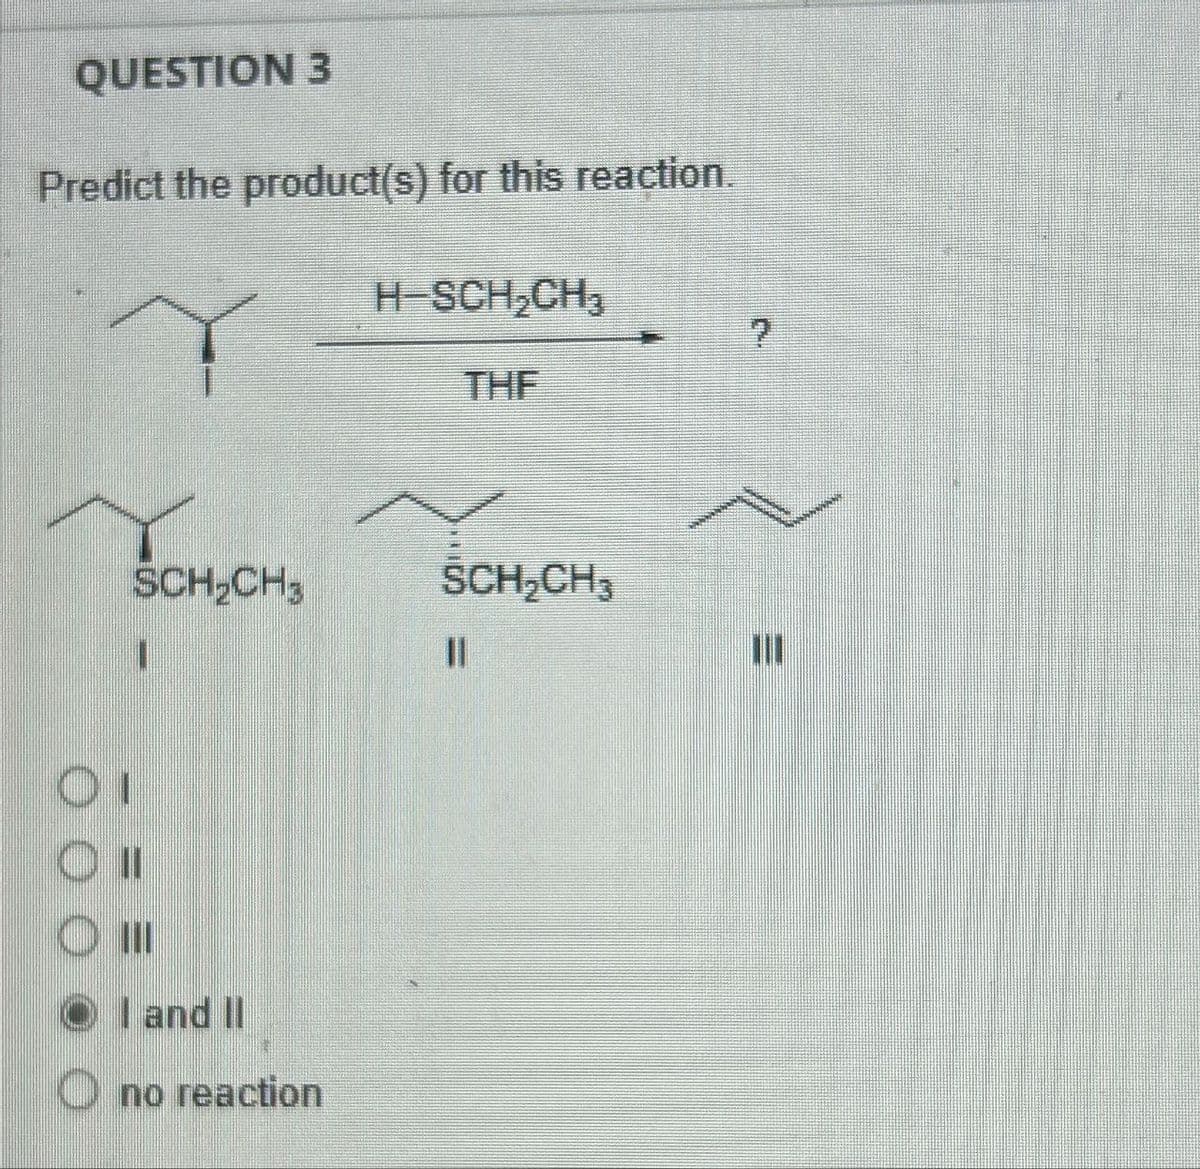 QUESTION 3
Predict the product(s) for this reaction.
H-SCH₂CH₂
SCH₂CH,
I
OI
O III
OI and II
O no reaction
THE
ŚCH₂CH3
ון